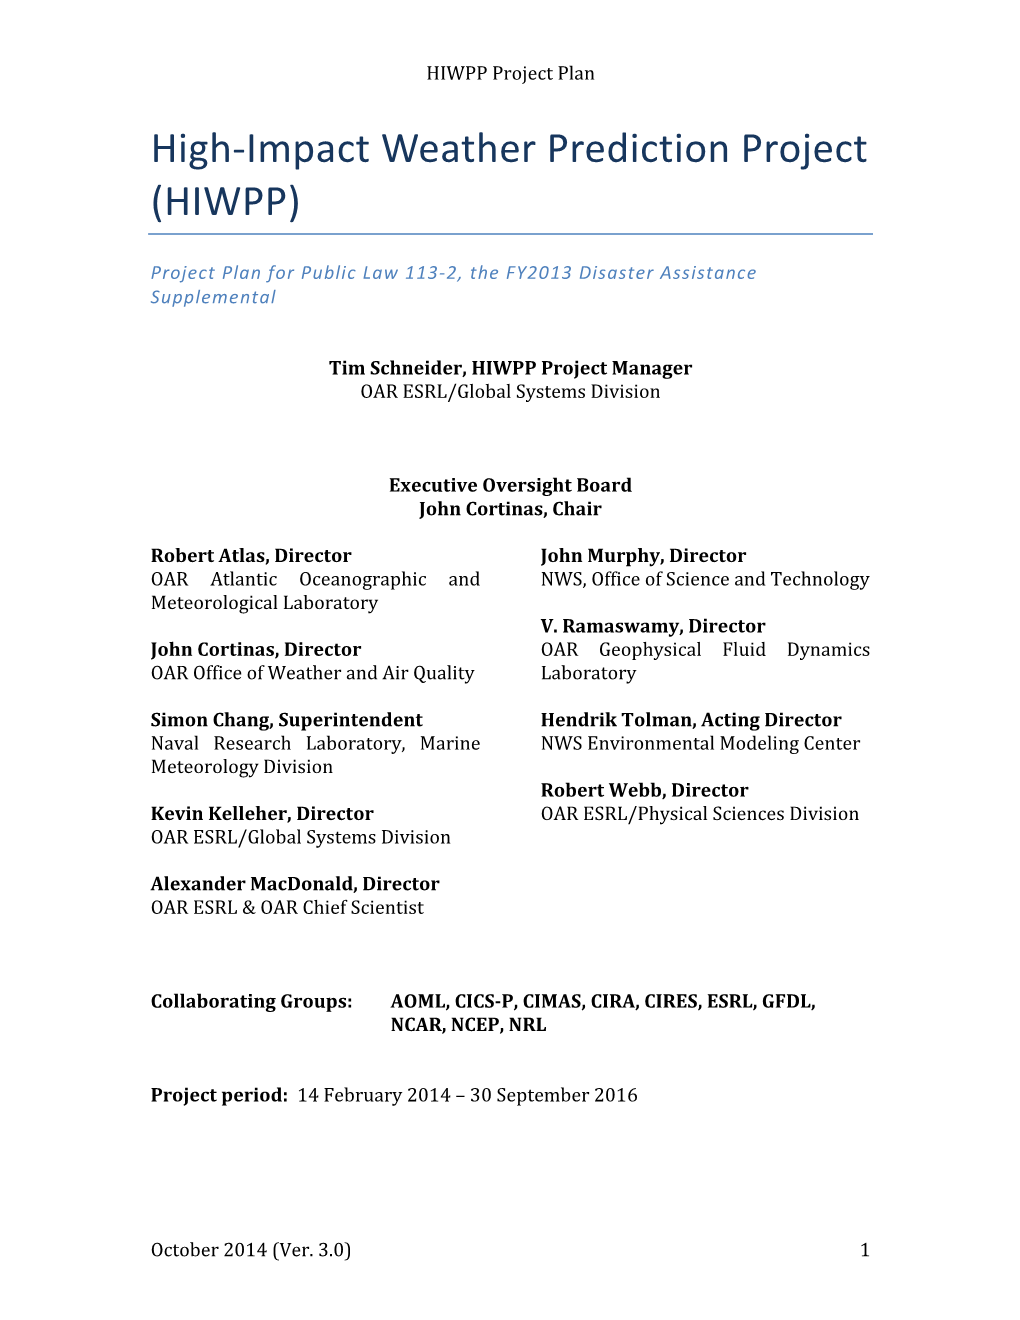 High-Impact Weather Prediction Project (HIWPP)